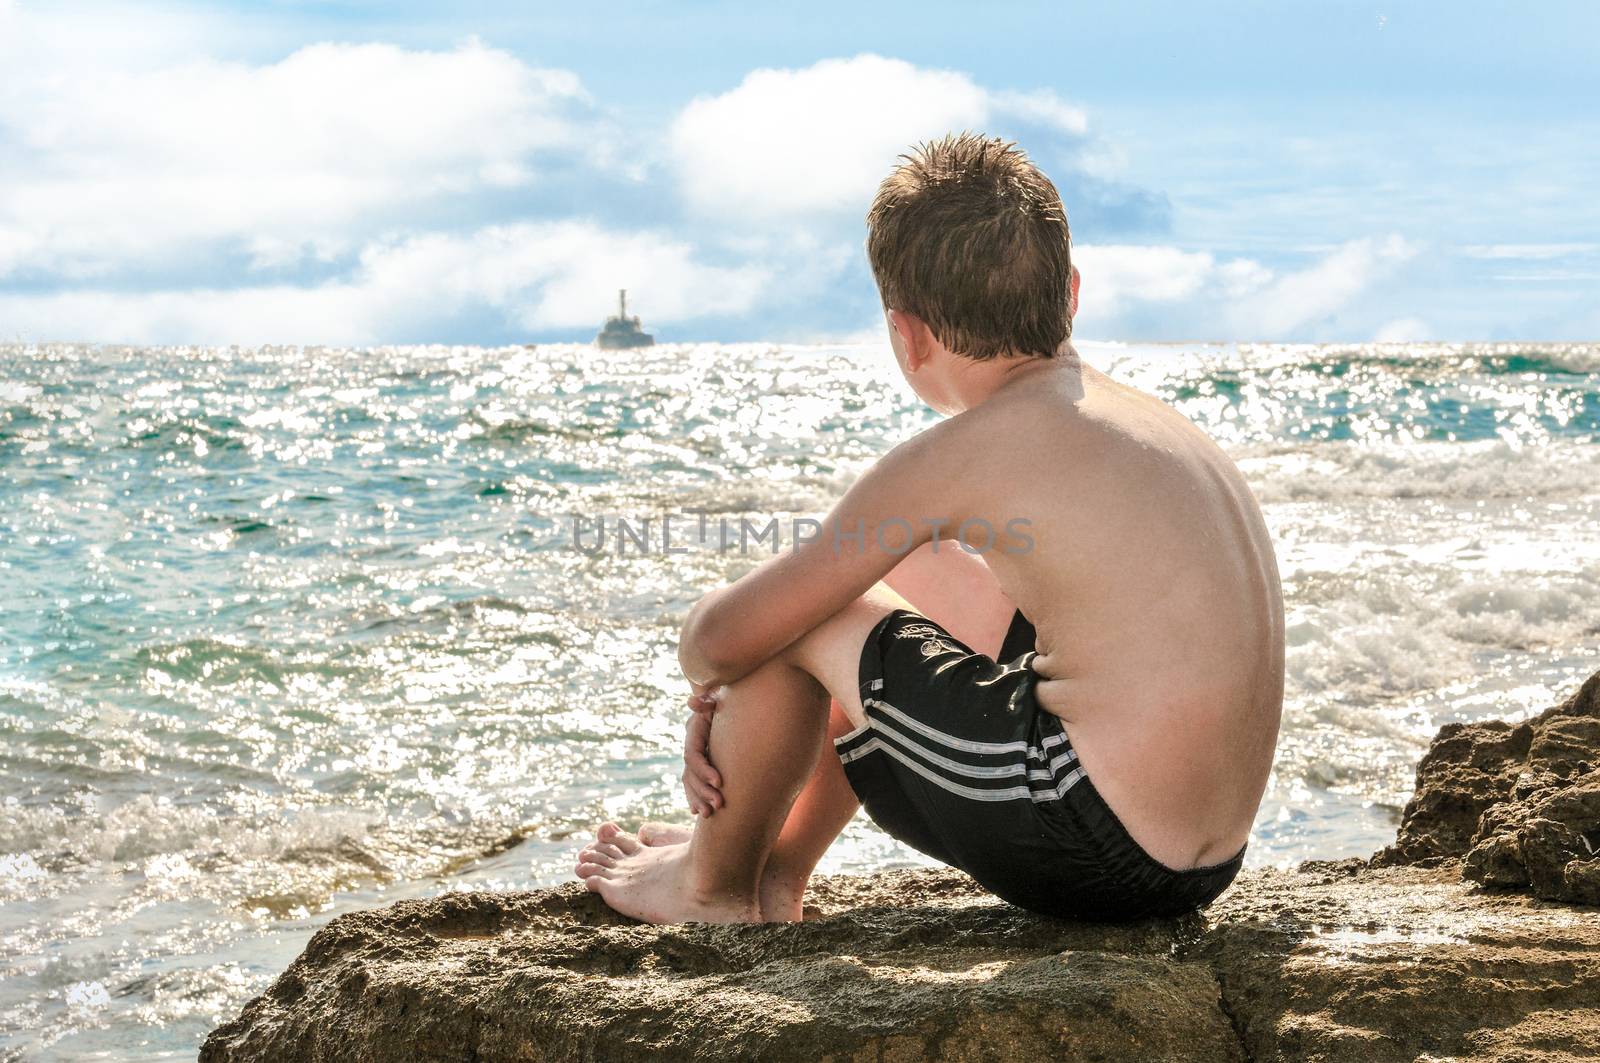 
	
The teenager sits on a large rock and looks at the ship leaving the horizon.